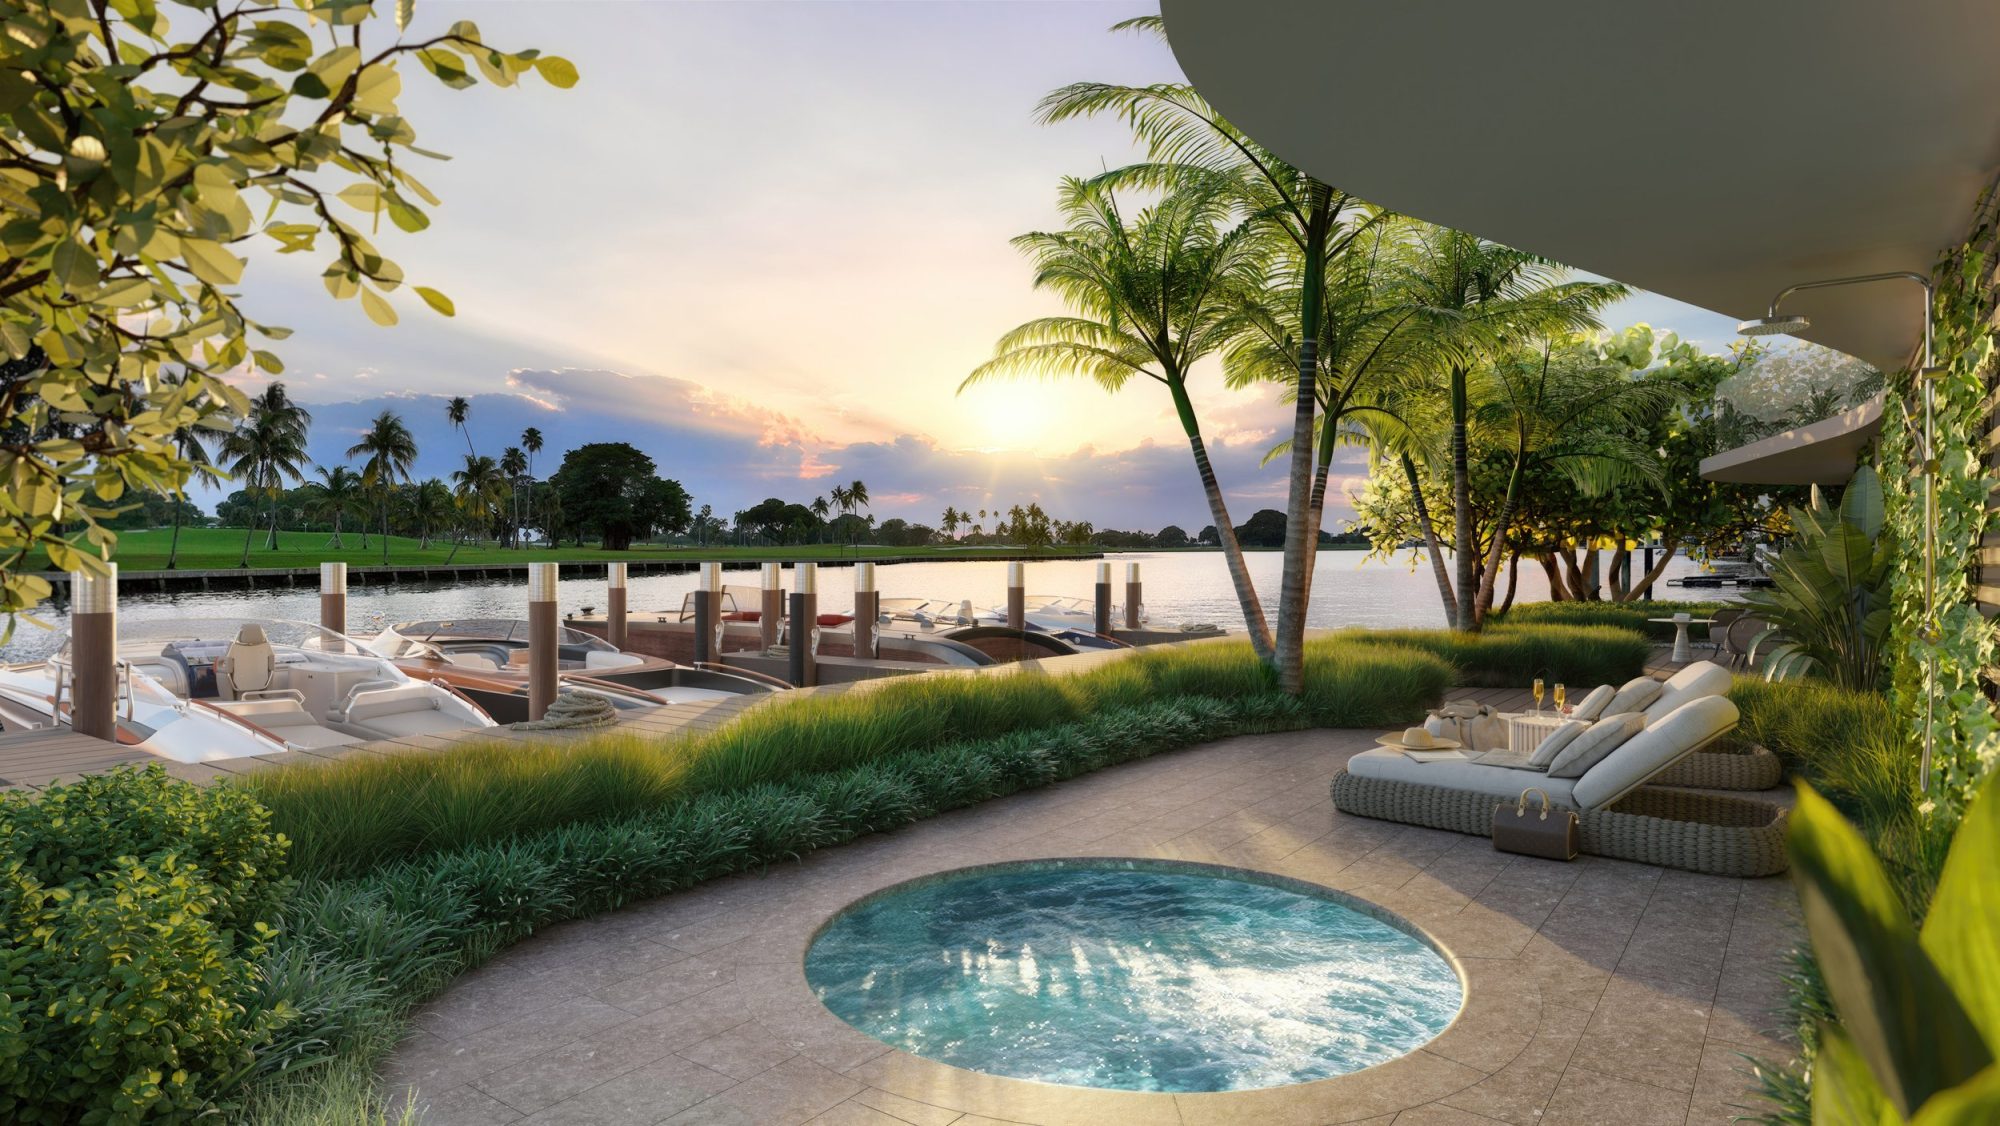 Indian Creek Residences is a limited collection of nine luxurious homes in Miami’s Bay Harbor Islands